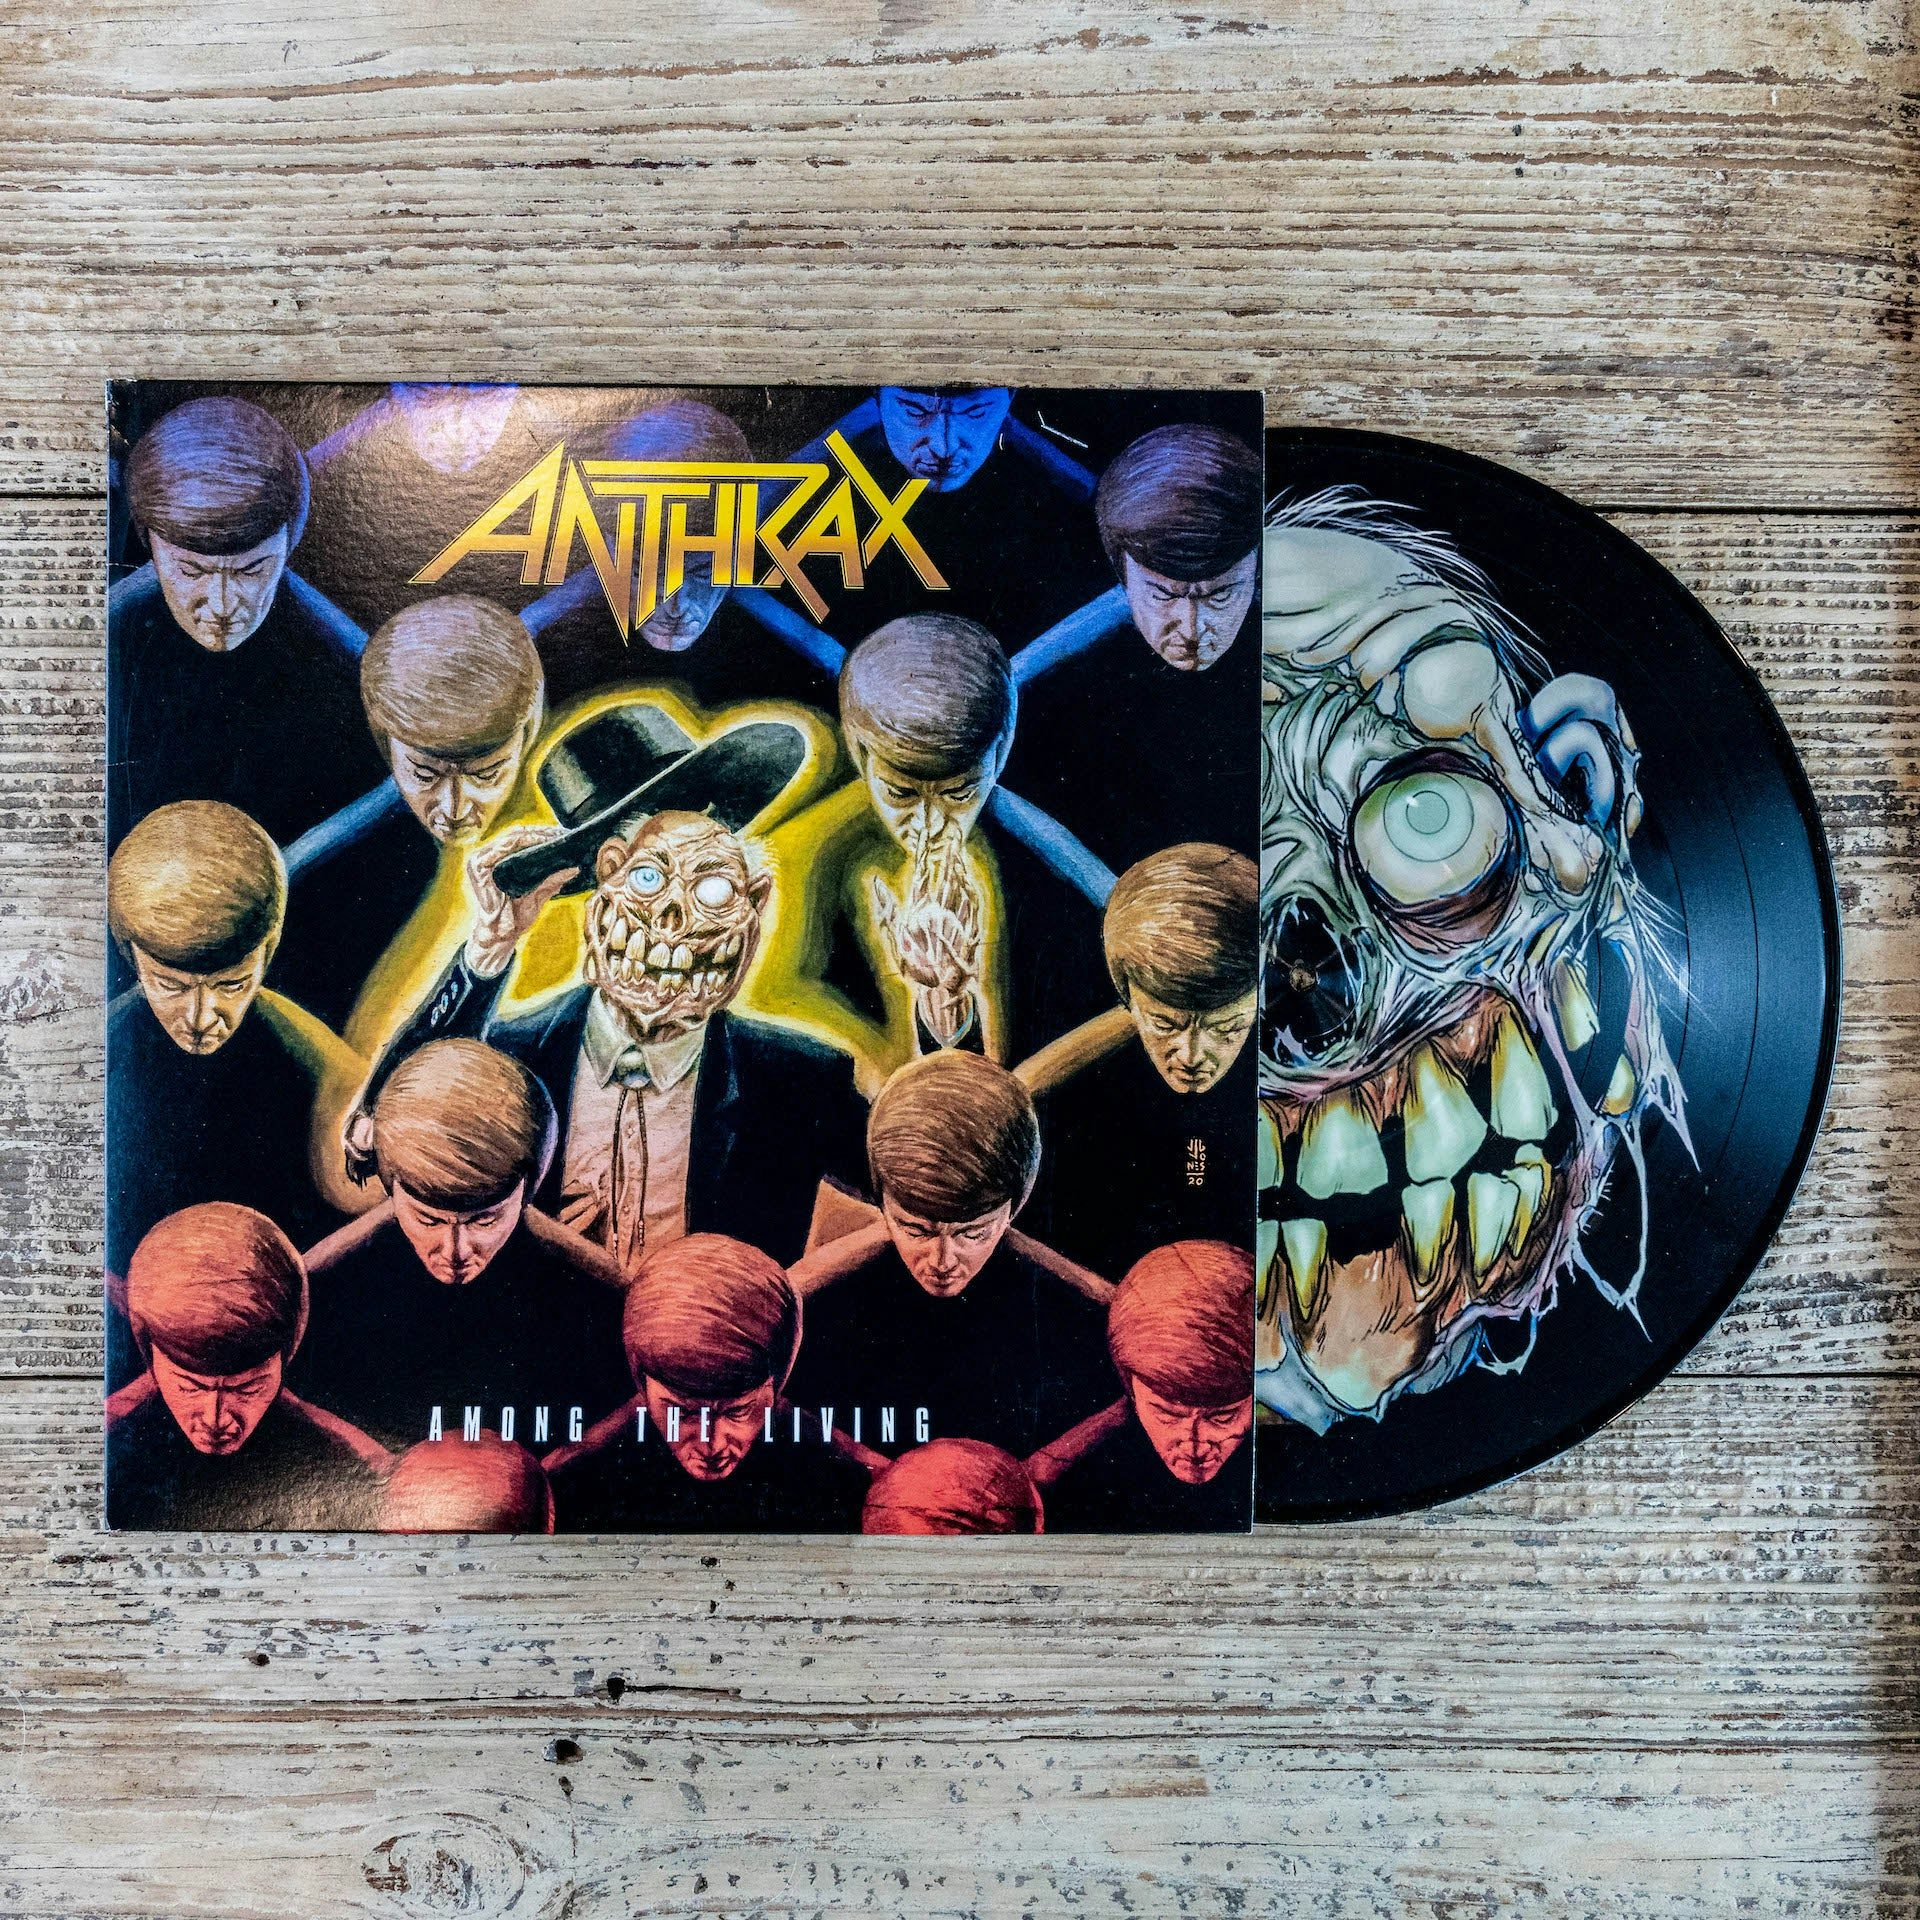 Anthrax Among the Living - Exclusive Vinyl Picture Disc LP